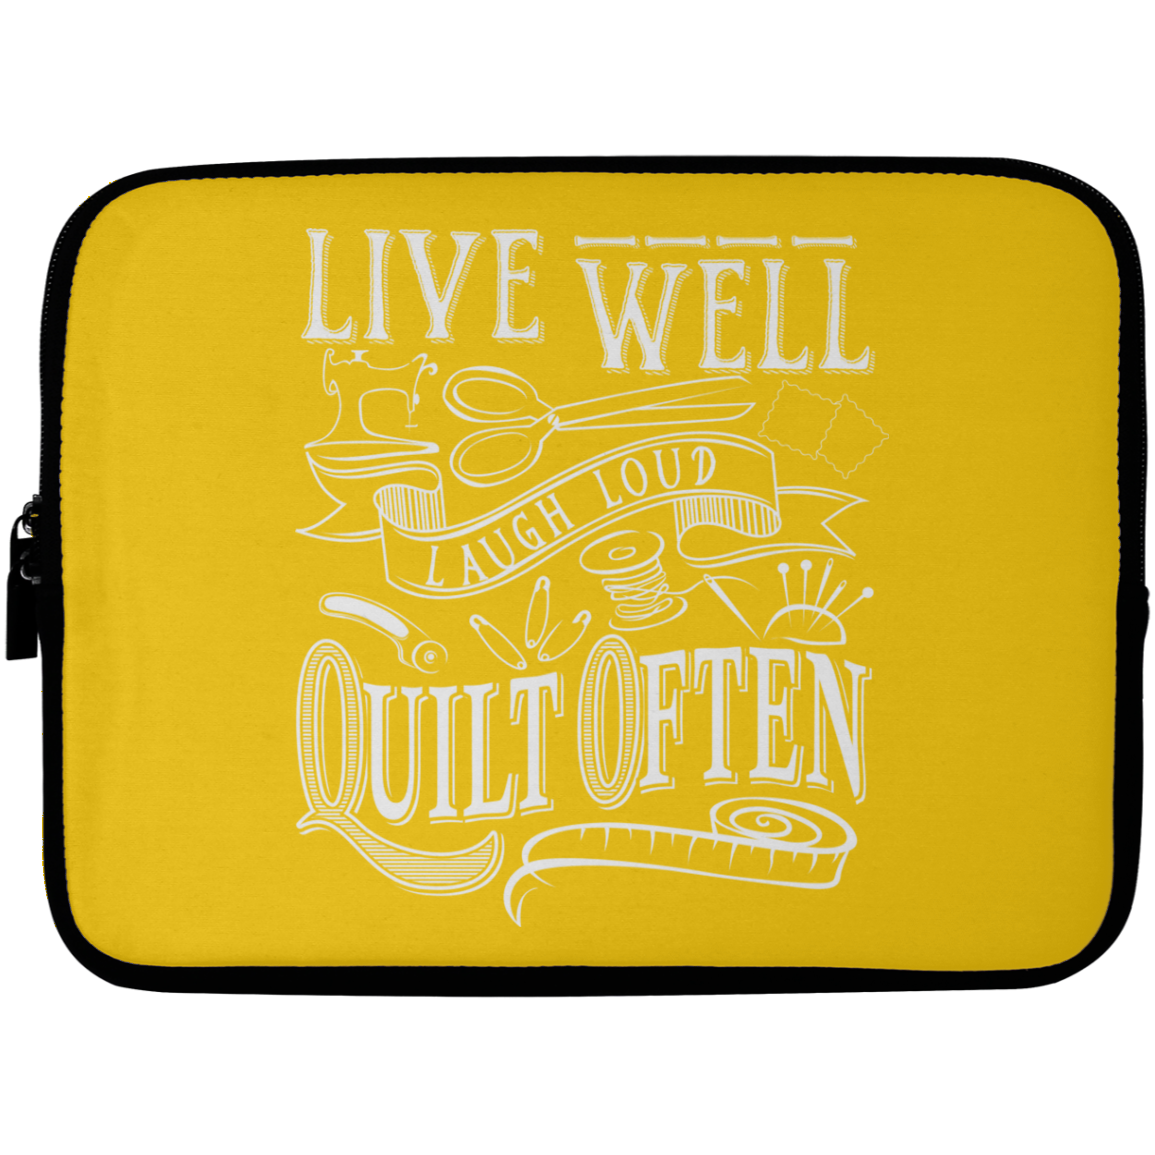 Live Well, Quilt Often Laptop Sleeves